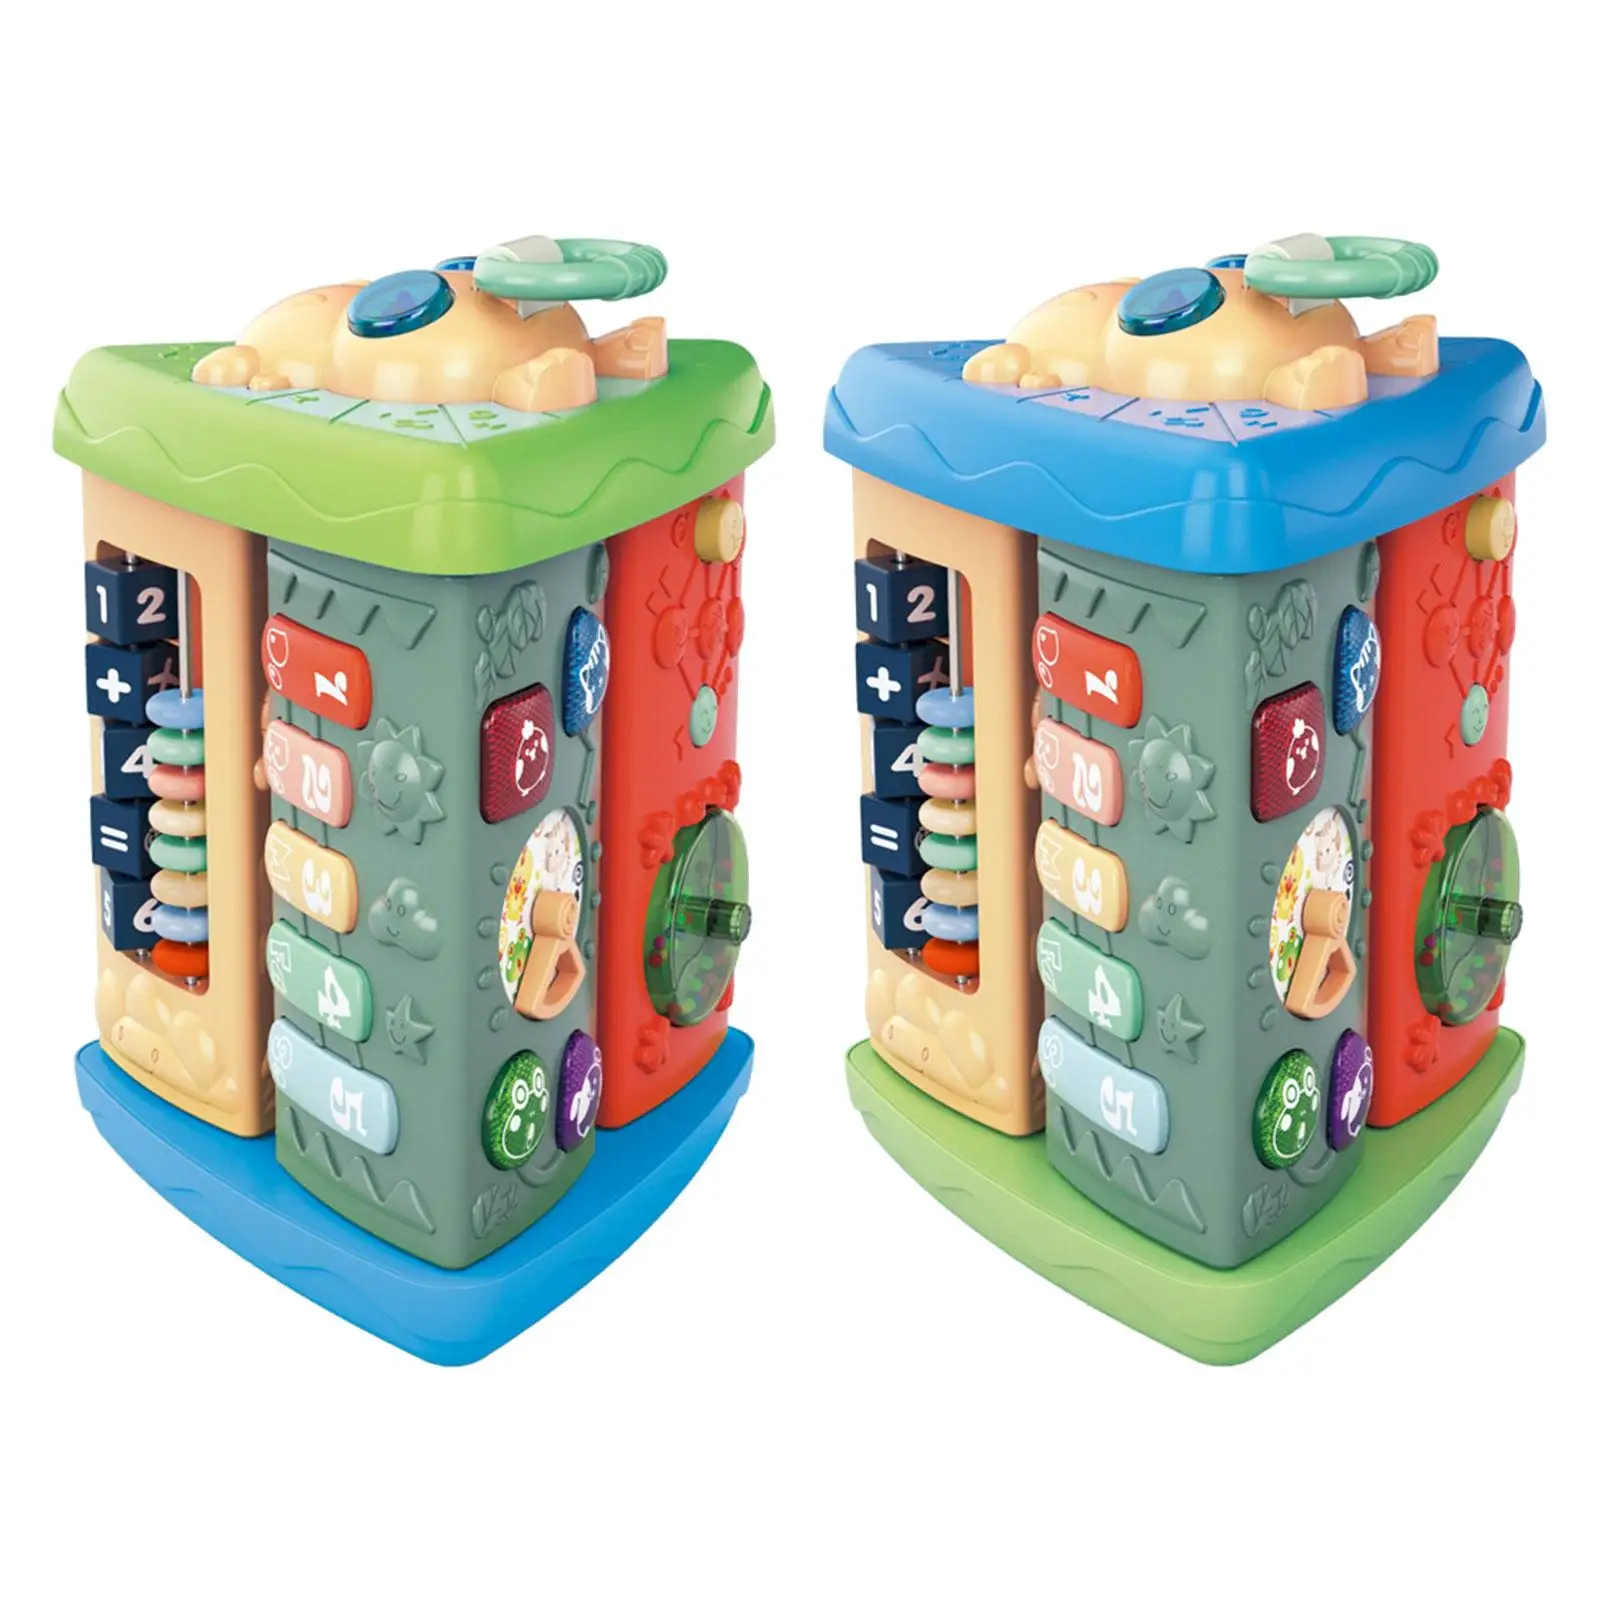 Musical Activity Toy Sensory Sound Toys Activity Cube Sound Center for Preschool Girls Children Gifts